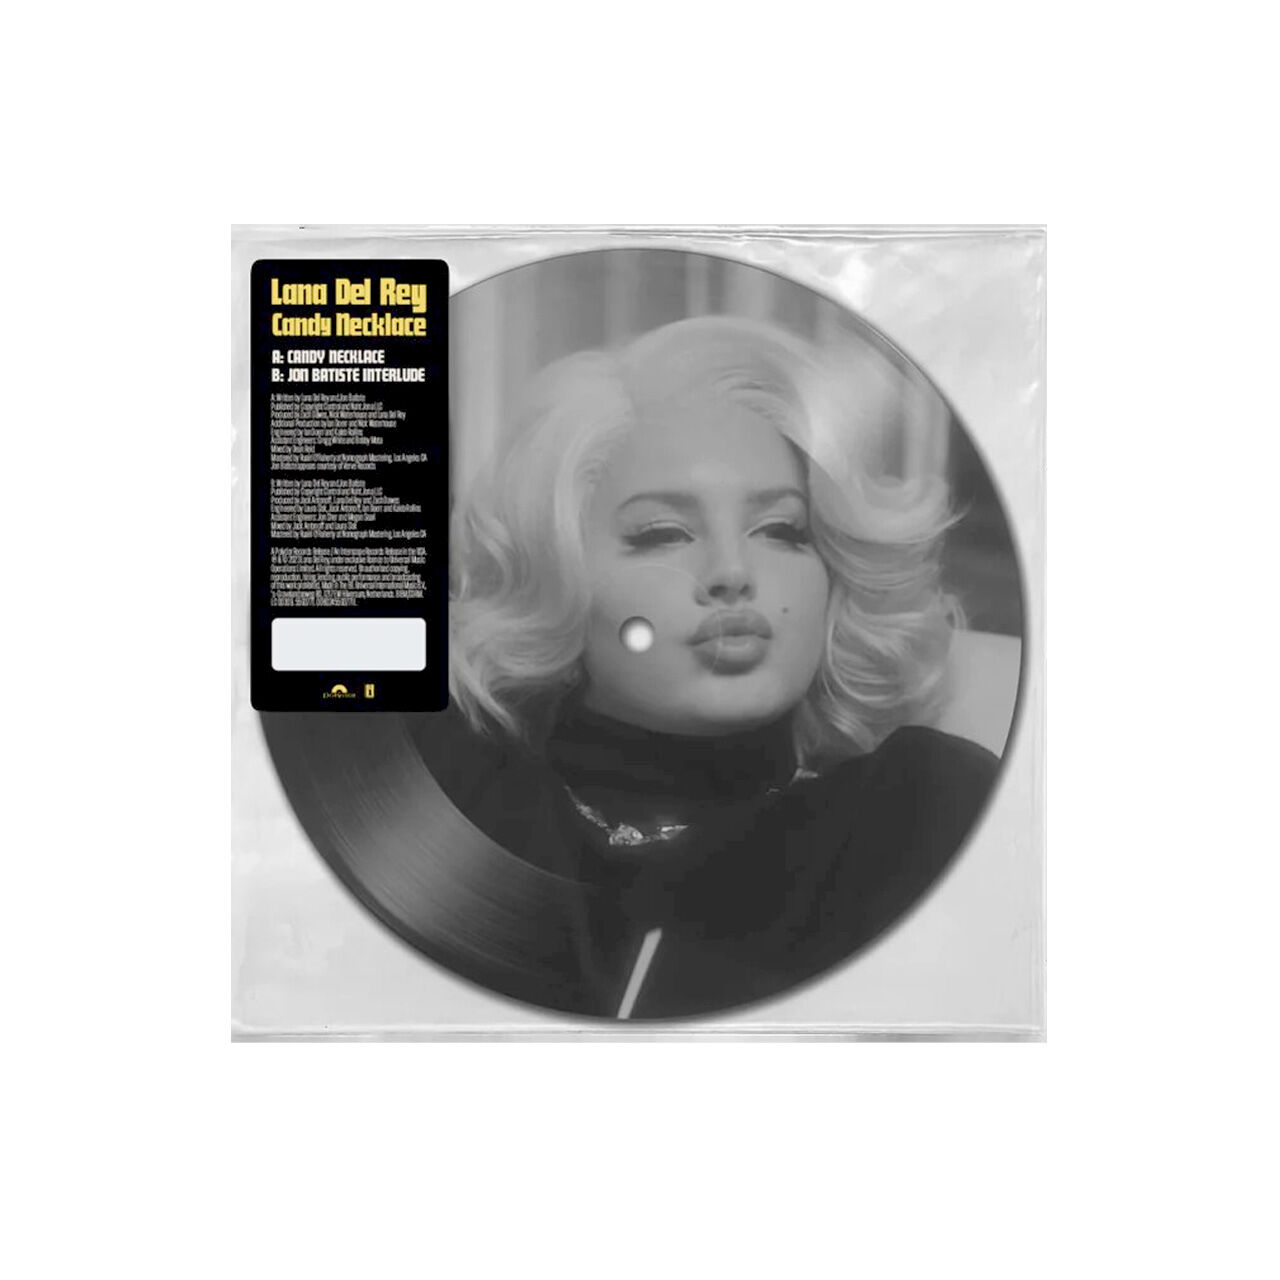 LANA DEL REY Candy Necklace Picture Disc 7inch Vinyl